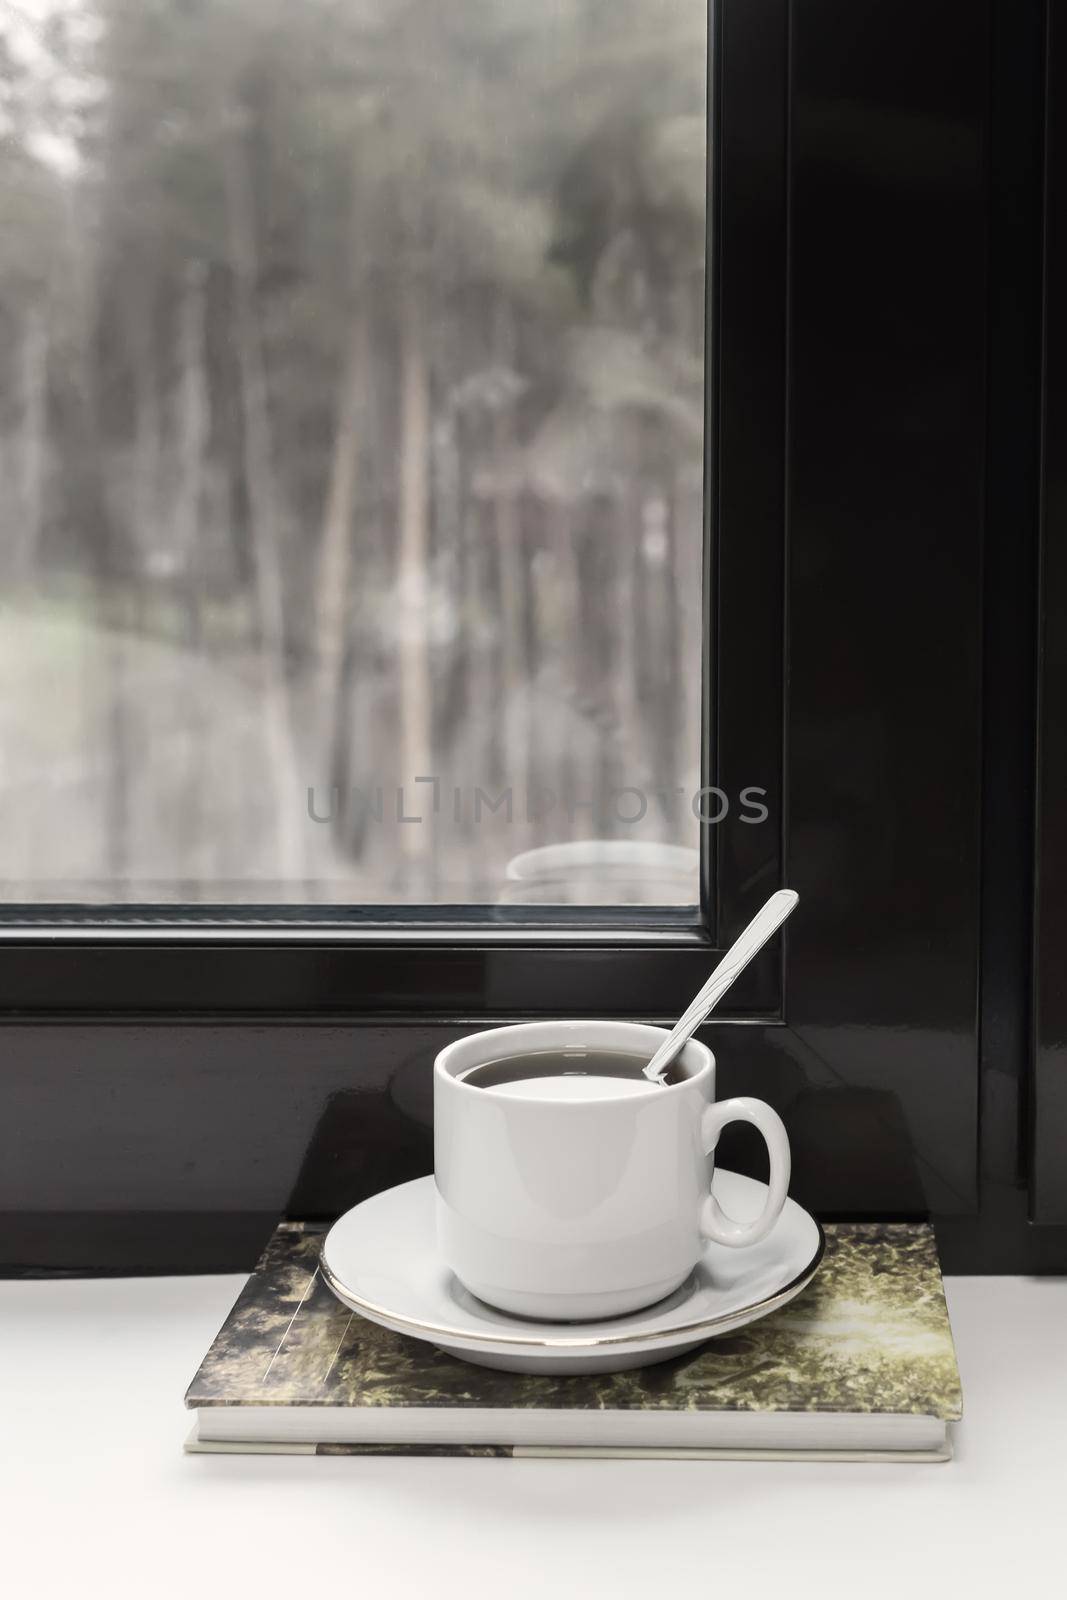 On the windowsill at the open window, a Cup of tea and a book, outside the window a view of the autumn Park.